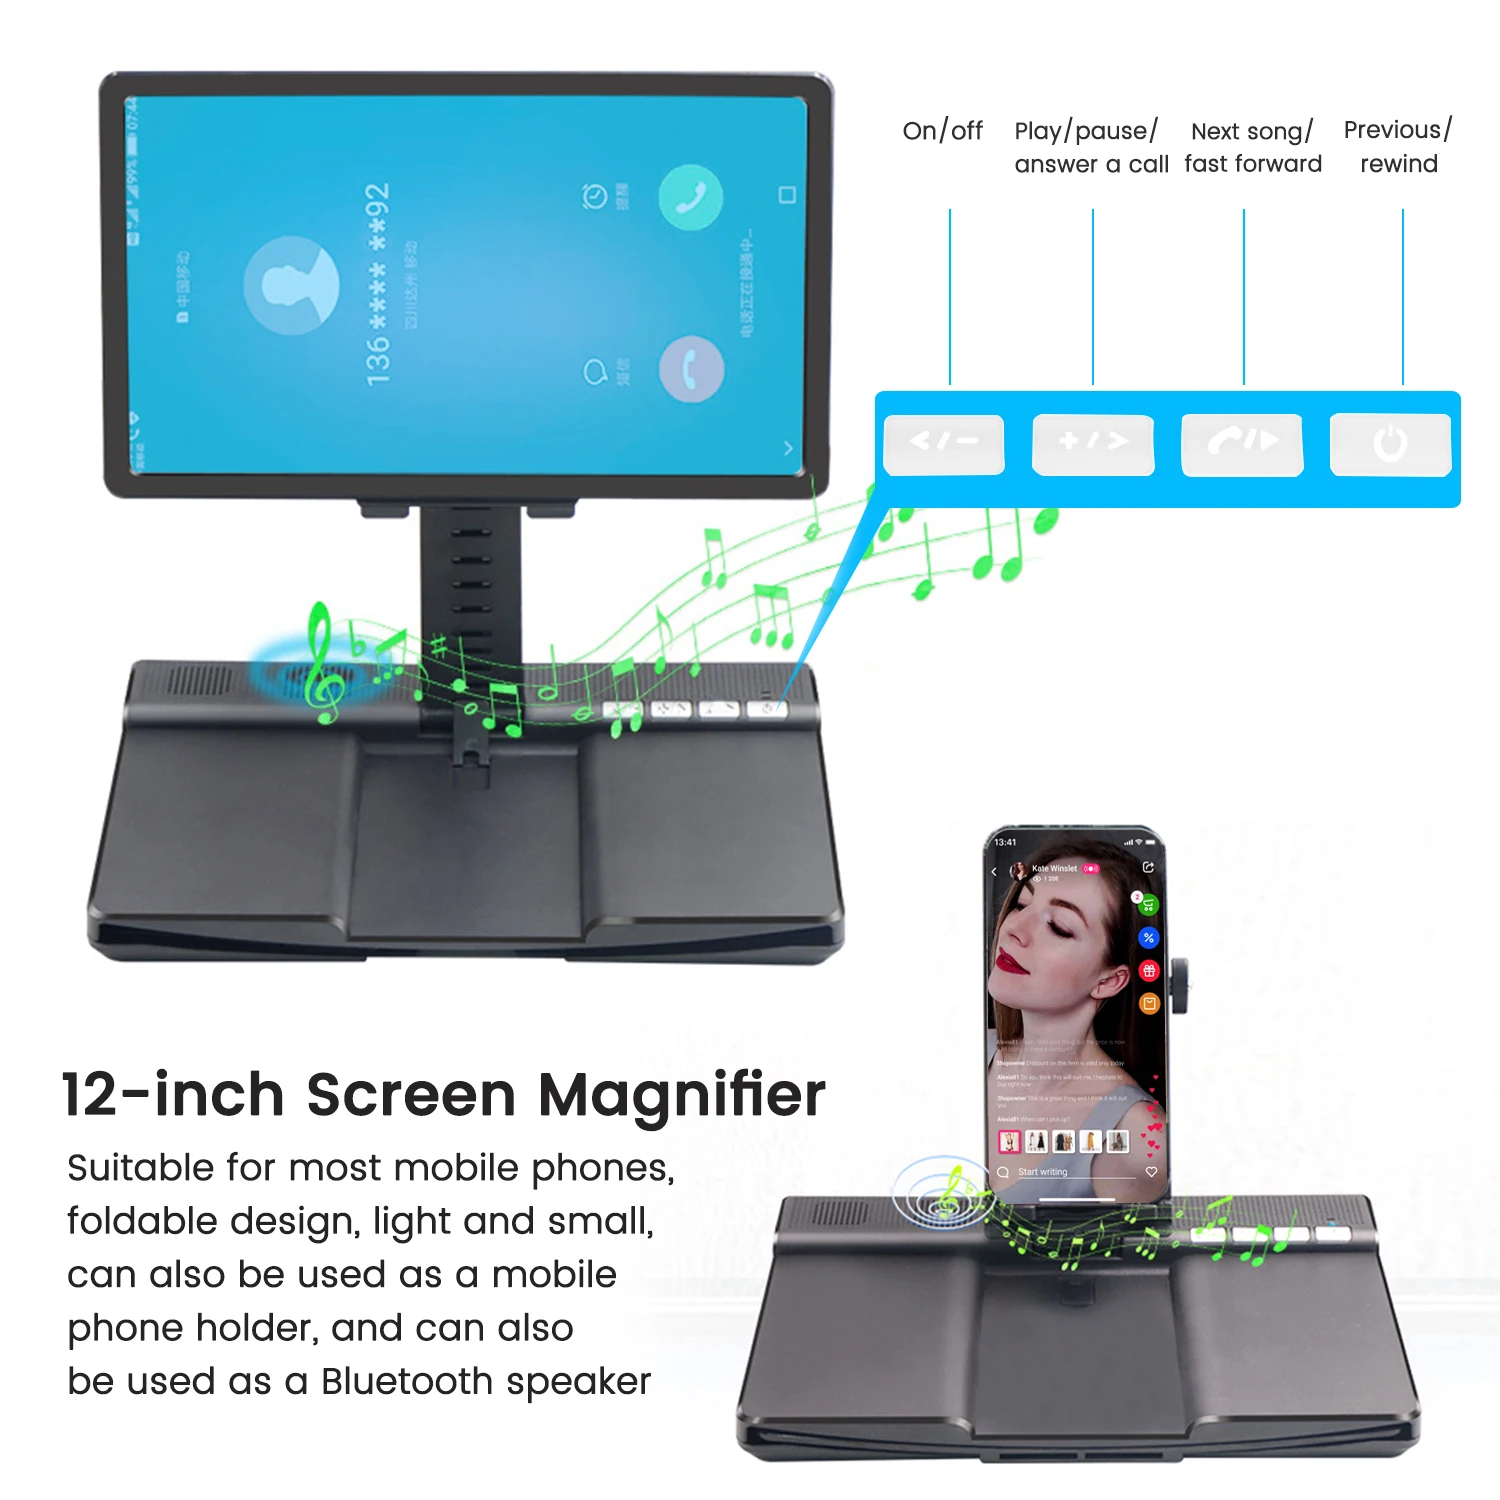 2 in 1 foldable mobile phone stand holder 12 inch phone screen magnifier with bluetooth speaker hd anti blue cell phone screen a free global shipping